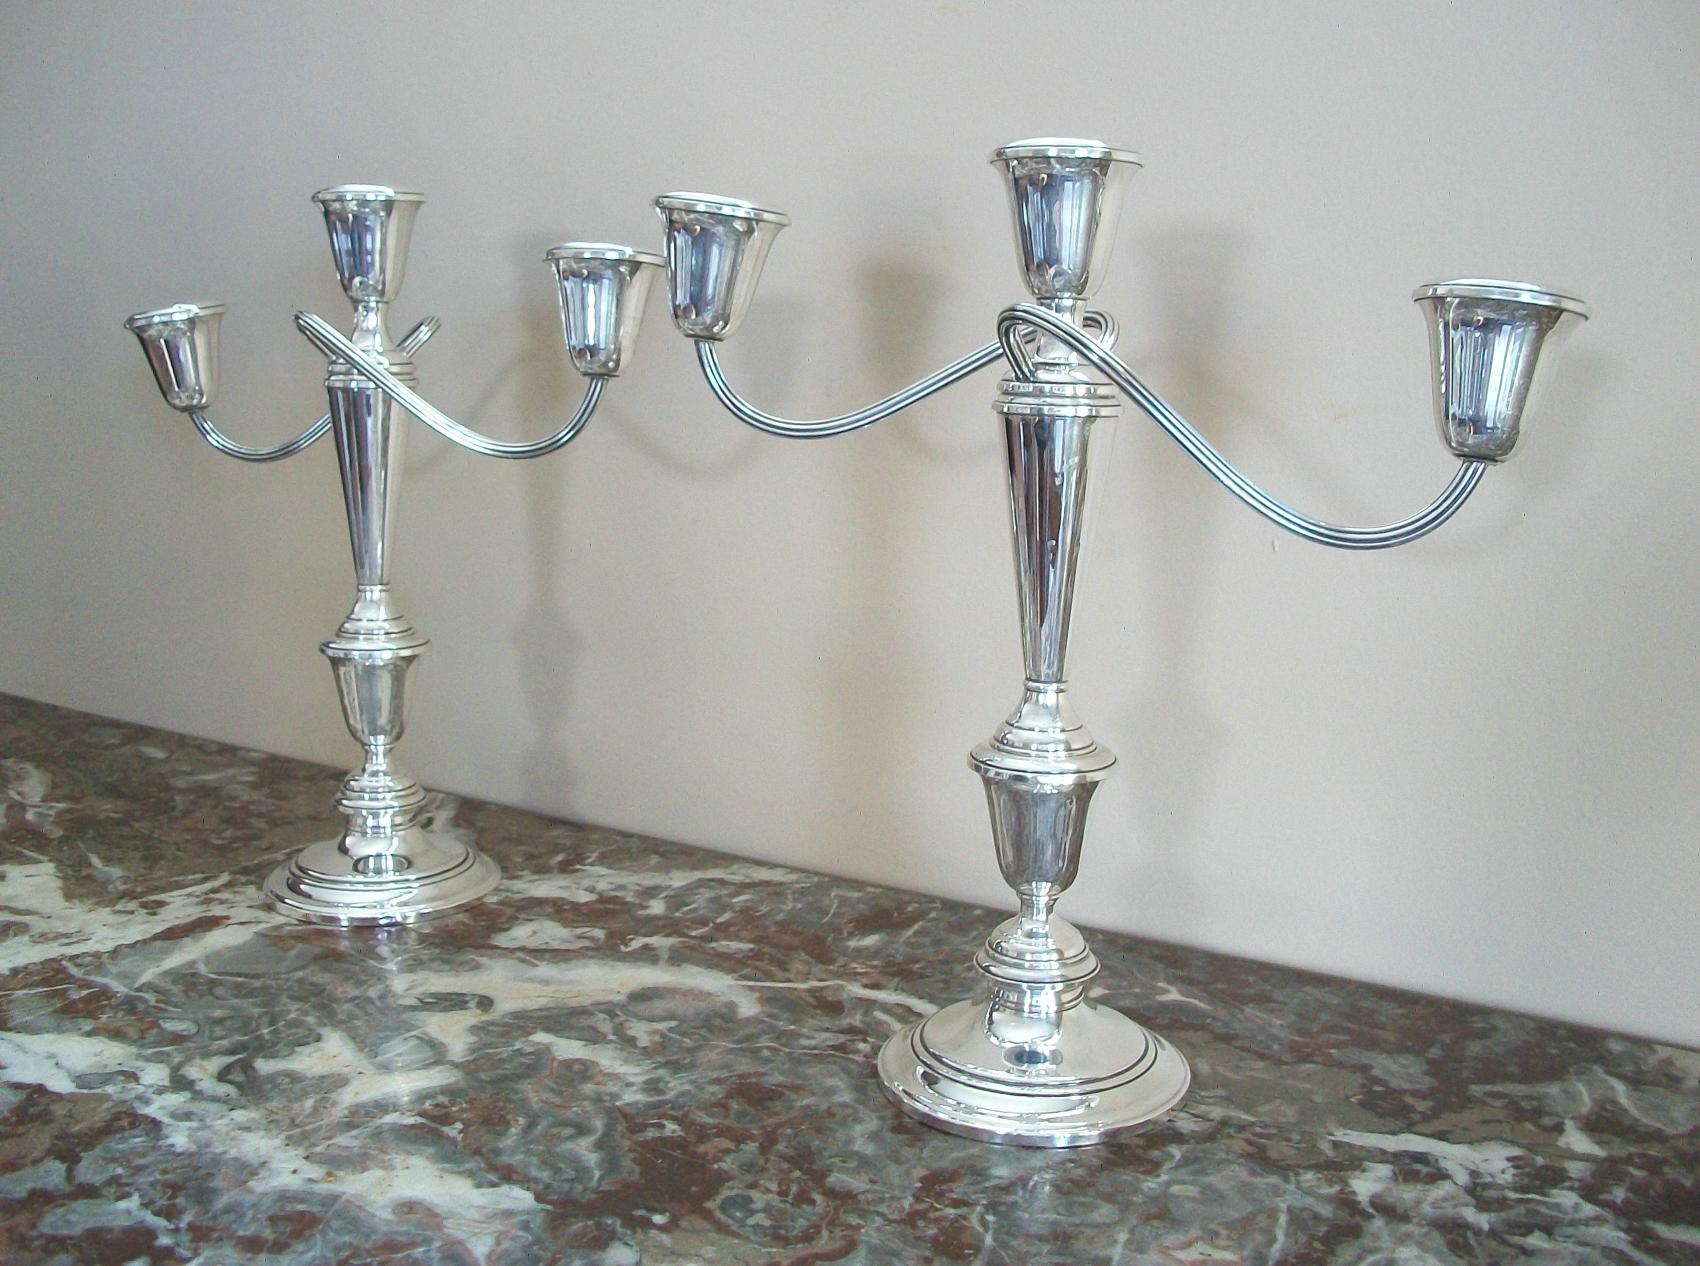 Regency Revival NEWPORT - Pair of Sterling Silver Candelabra - Weighted - U.S.A. - 20th Century For Sale